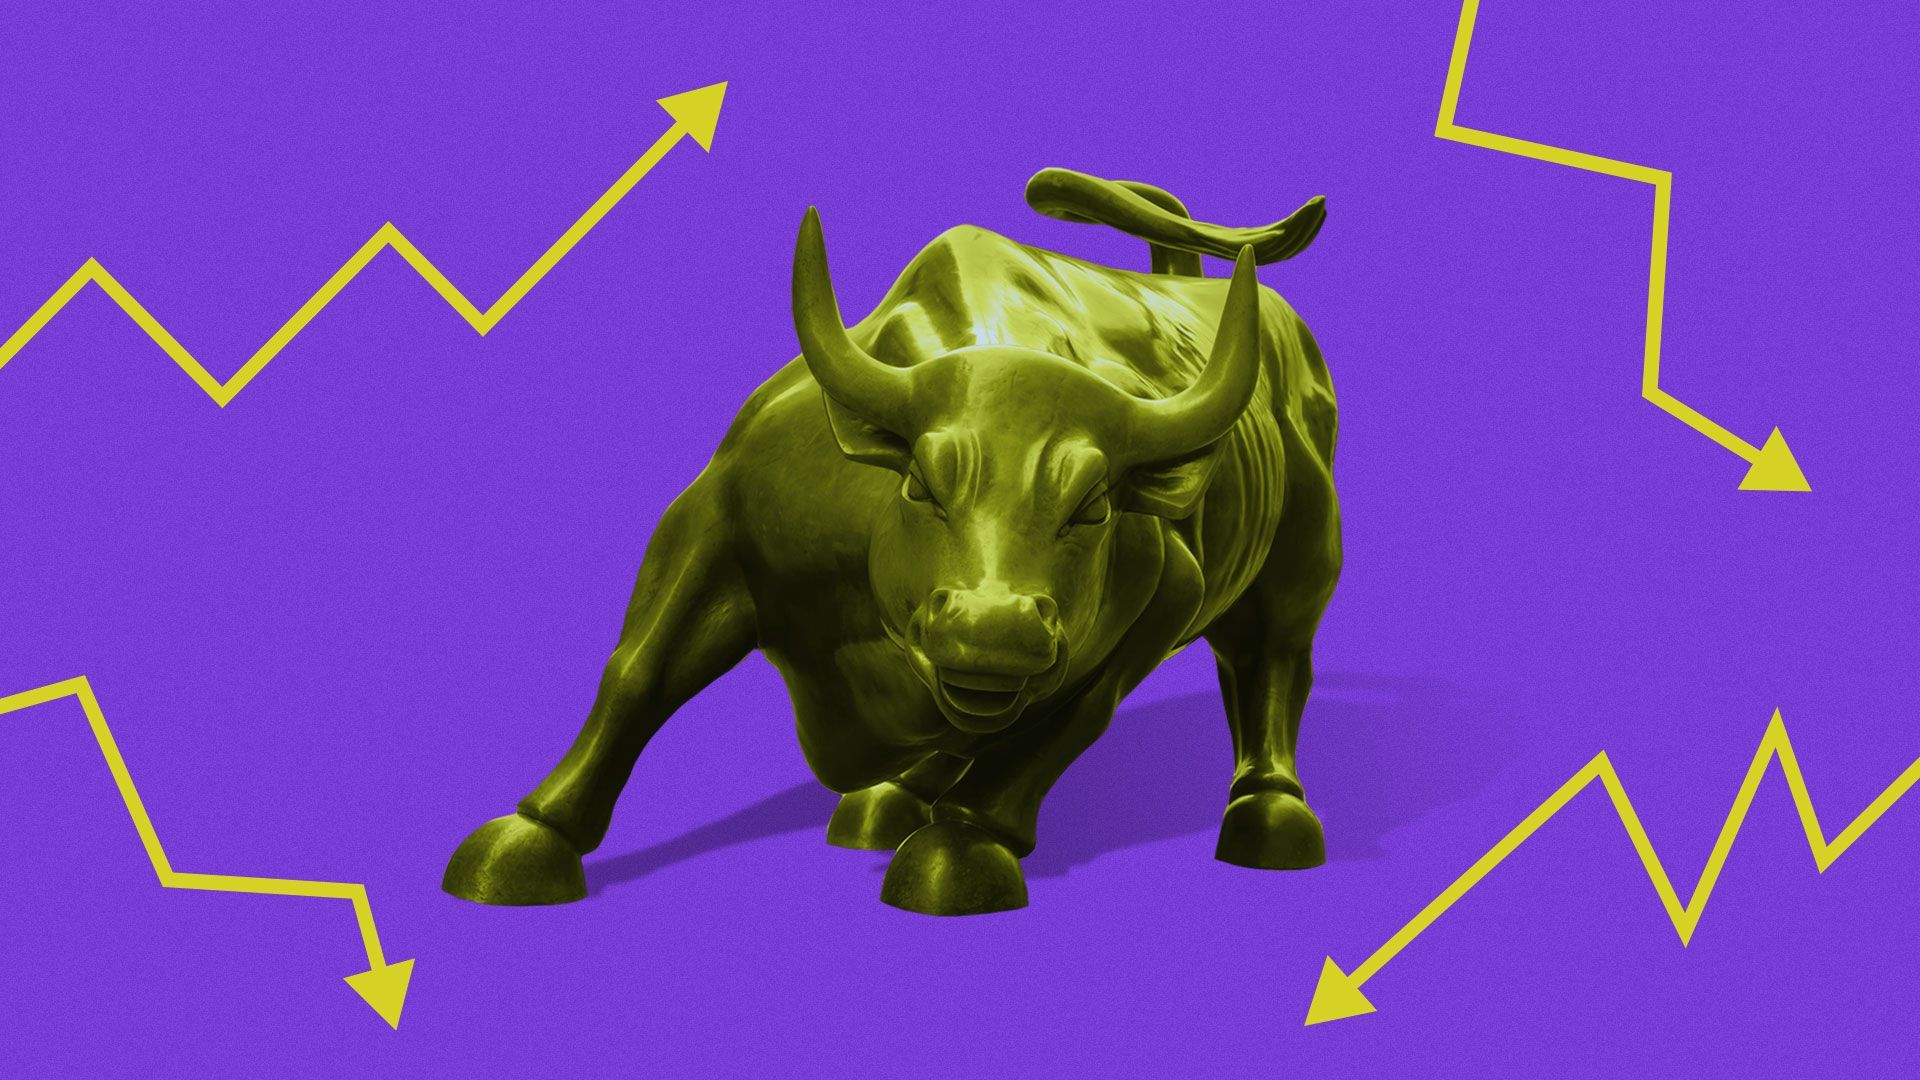 Illustration of Wall Street bull surrounded by various upward and downward trending line graphs